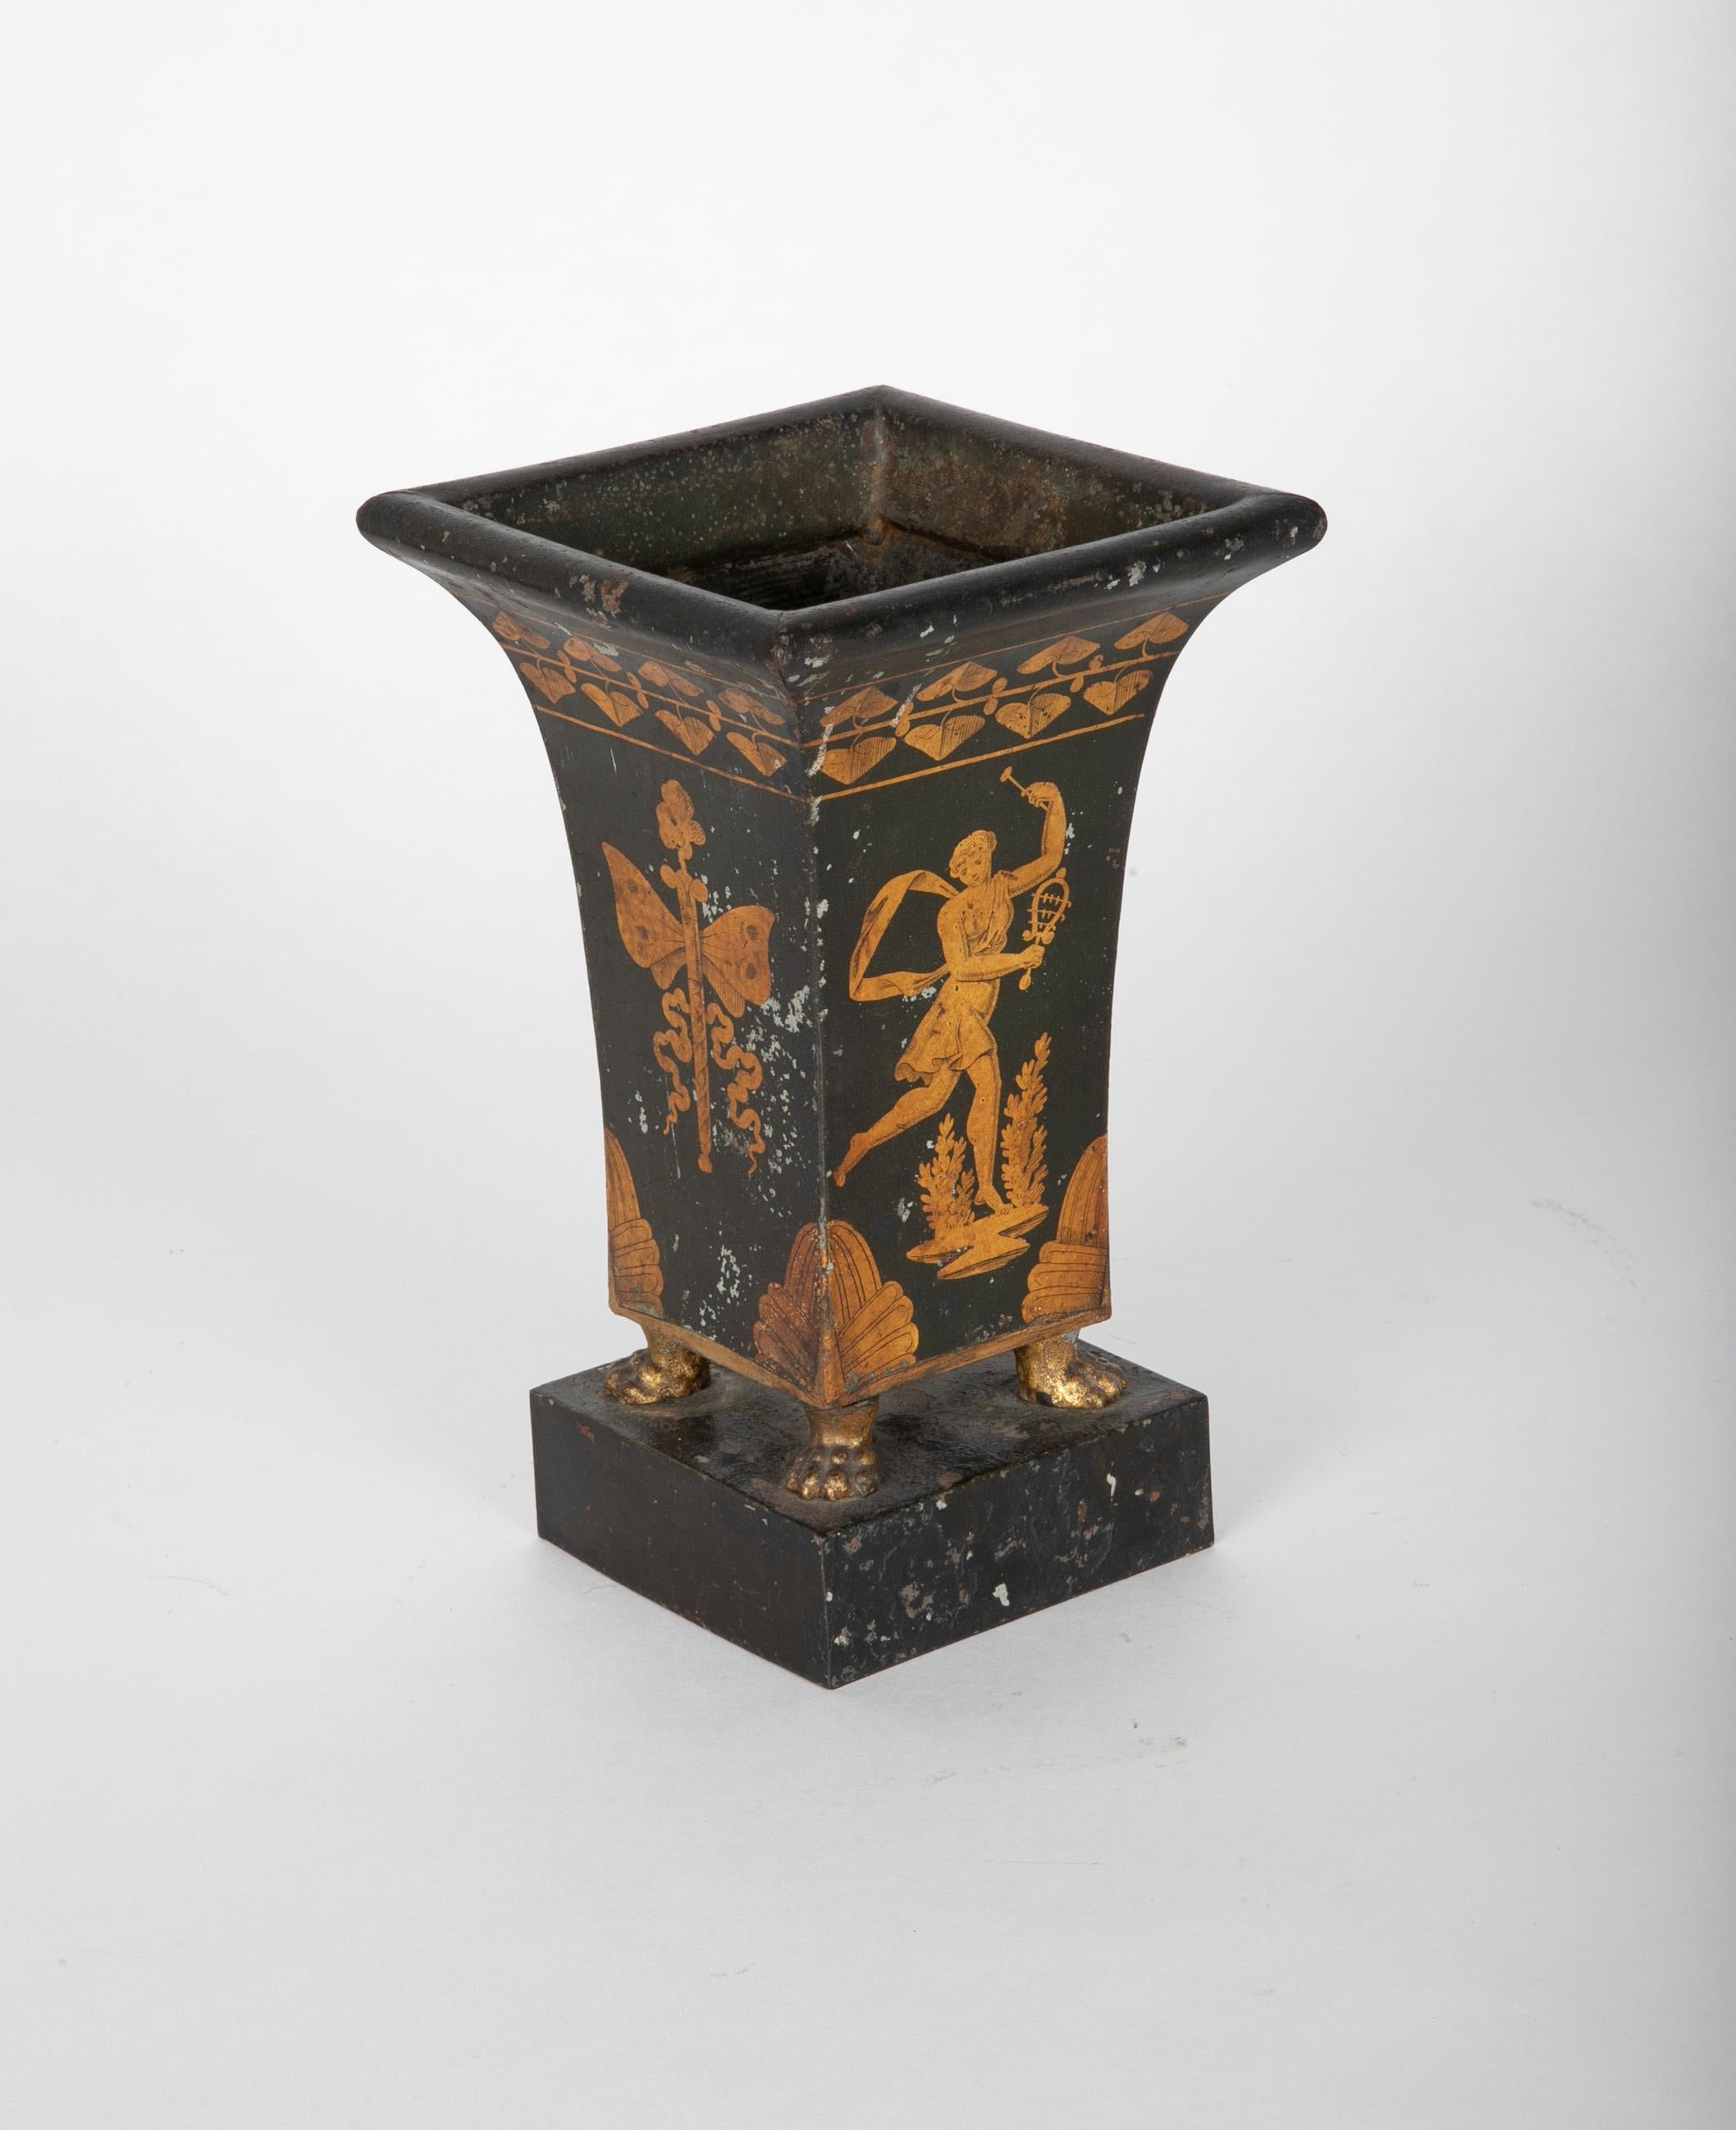 A very charming early 19th century French tole peinte vase or urn with a gilt figure of a dancing maiden with one breast exposed playing a sistrum, ancient musical instrument. The urn supported on a rectangular plinth by four gilt lion paw feet. The